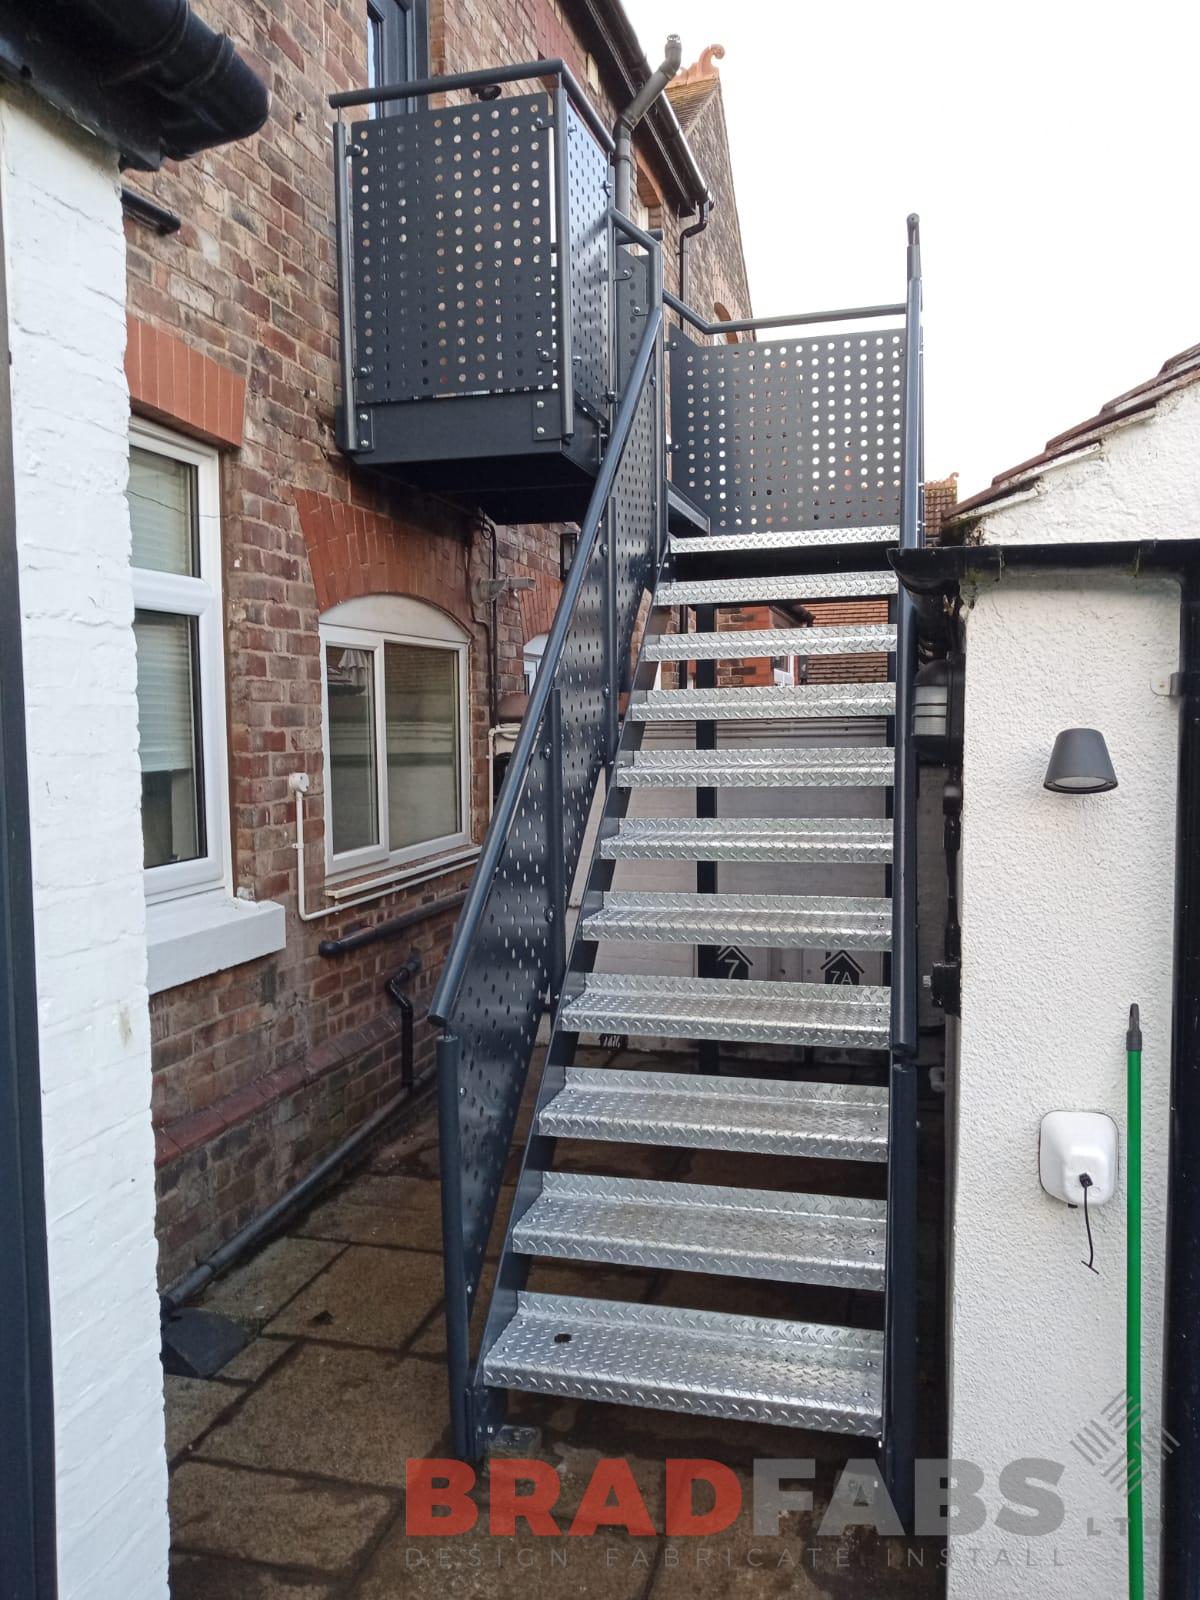 External steel staircase manufactured in mild steel, galvanised and powder coated with laser cut perforated infill panel balustrade by Bradfabs